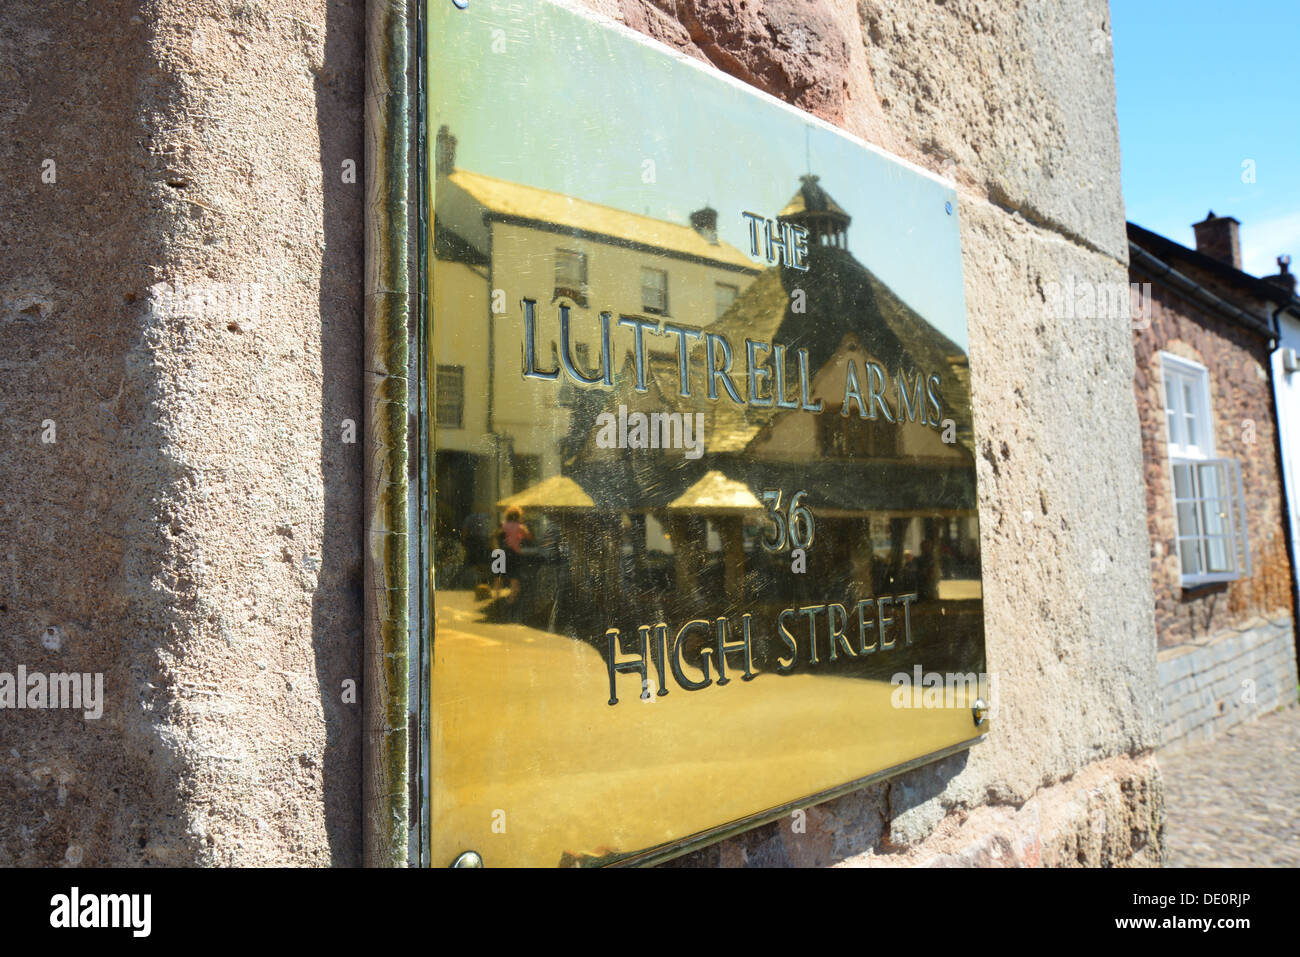 The Yarn Market reflected in The Luttrell Arms plaque, High Street, Dunster, Somerset, England, United Kingdom Stock Photo